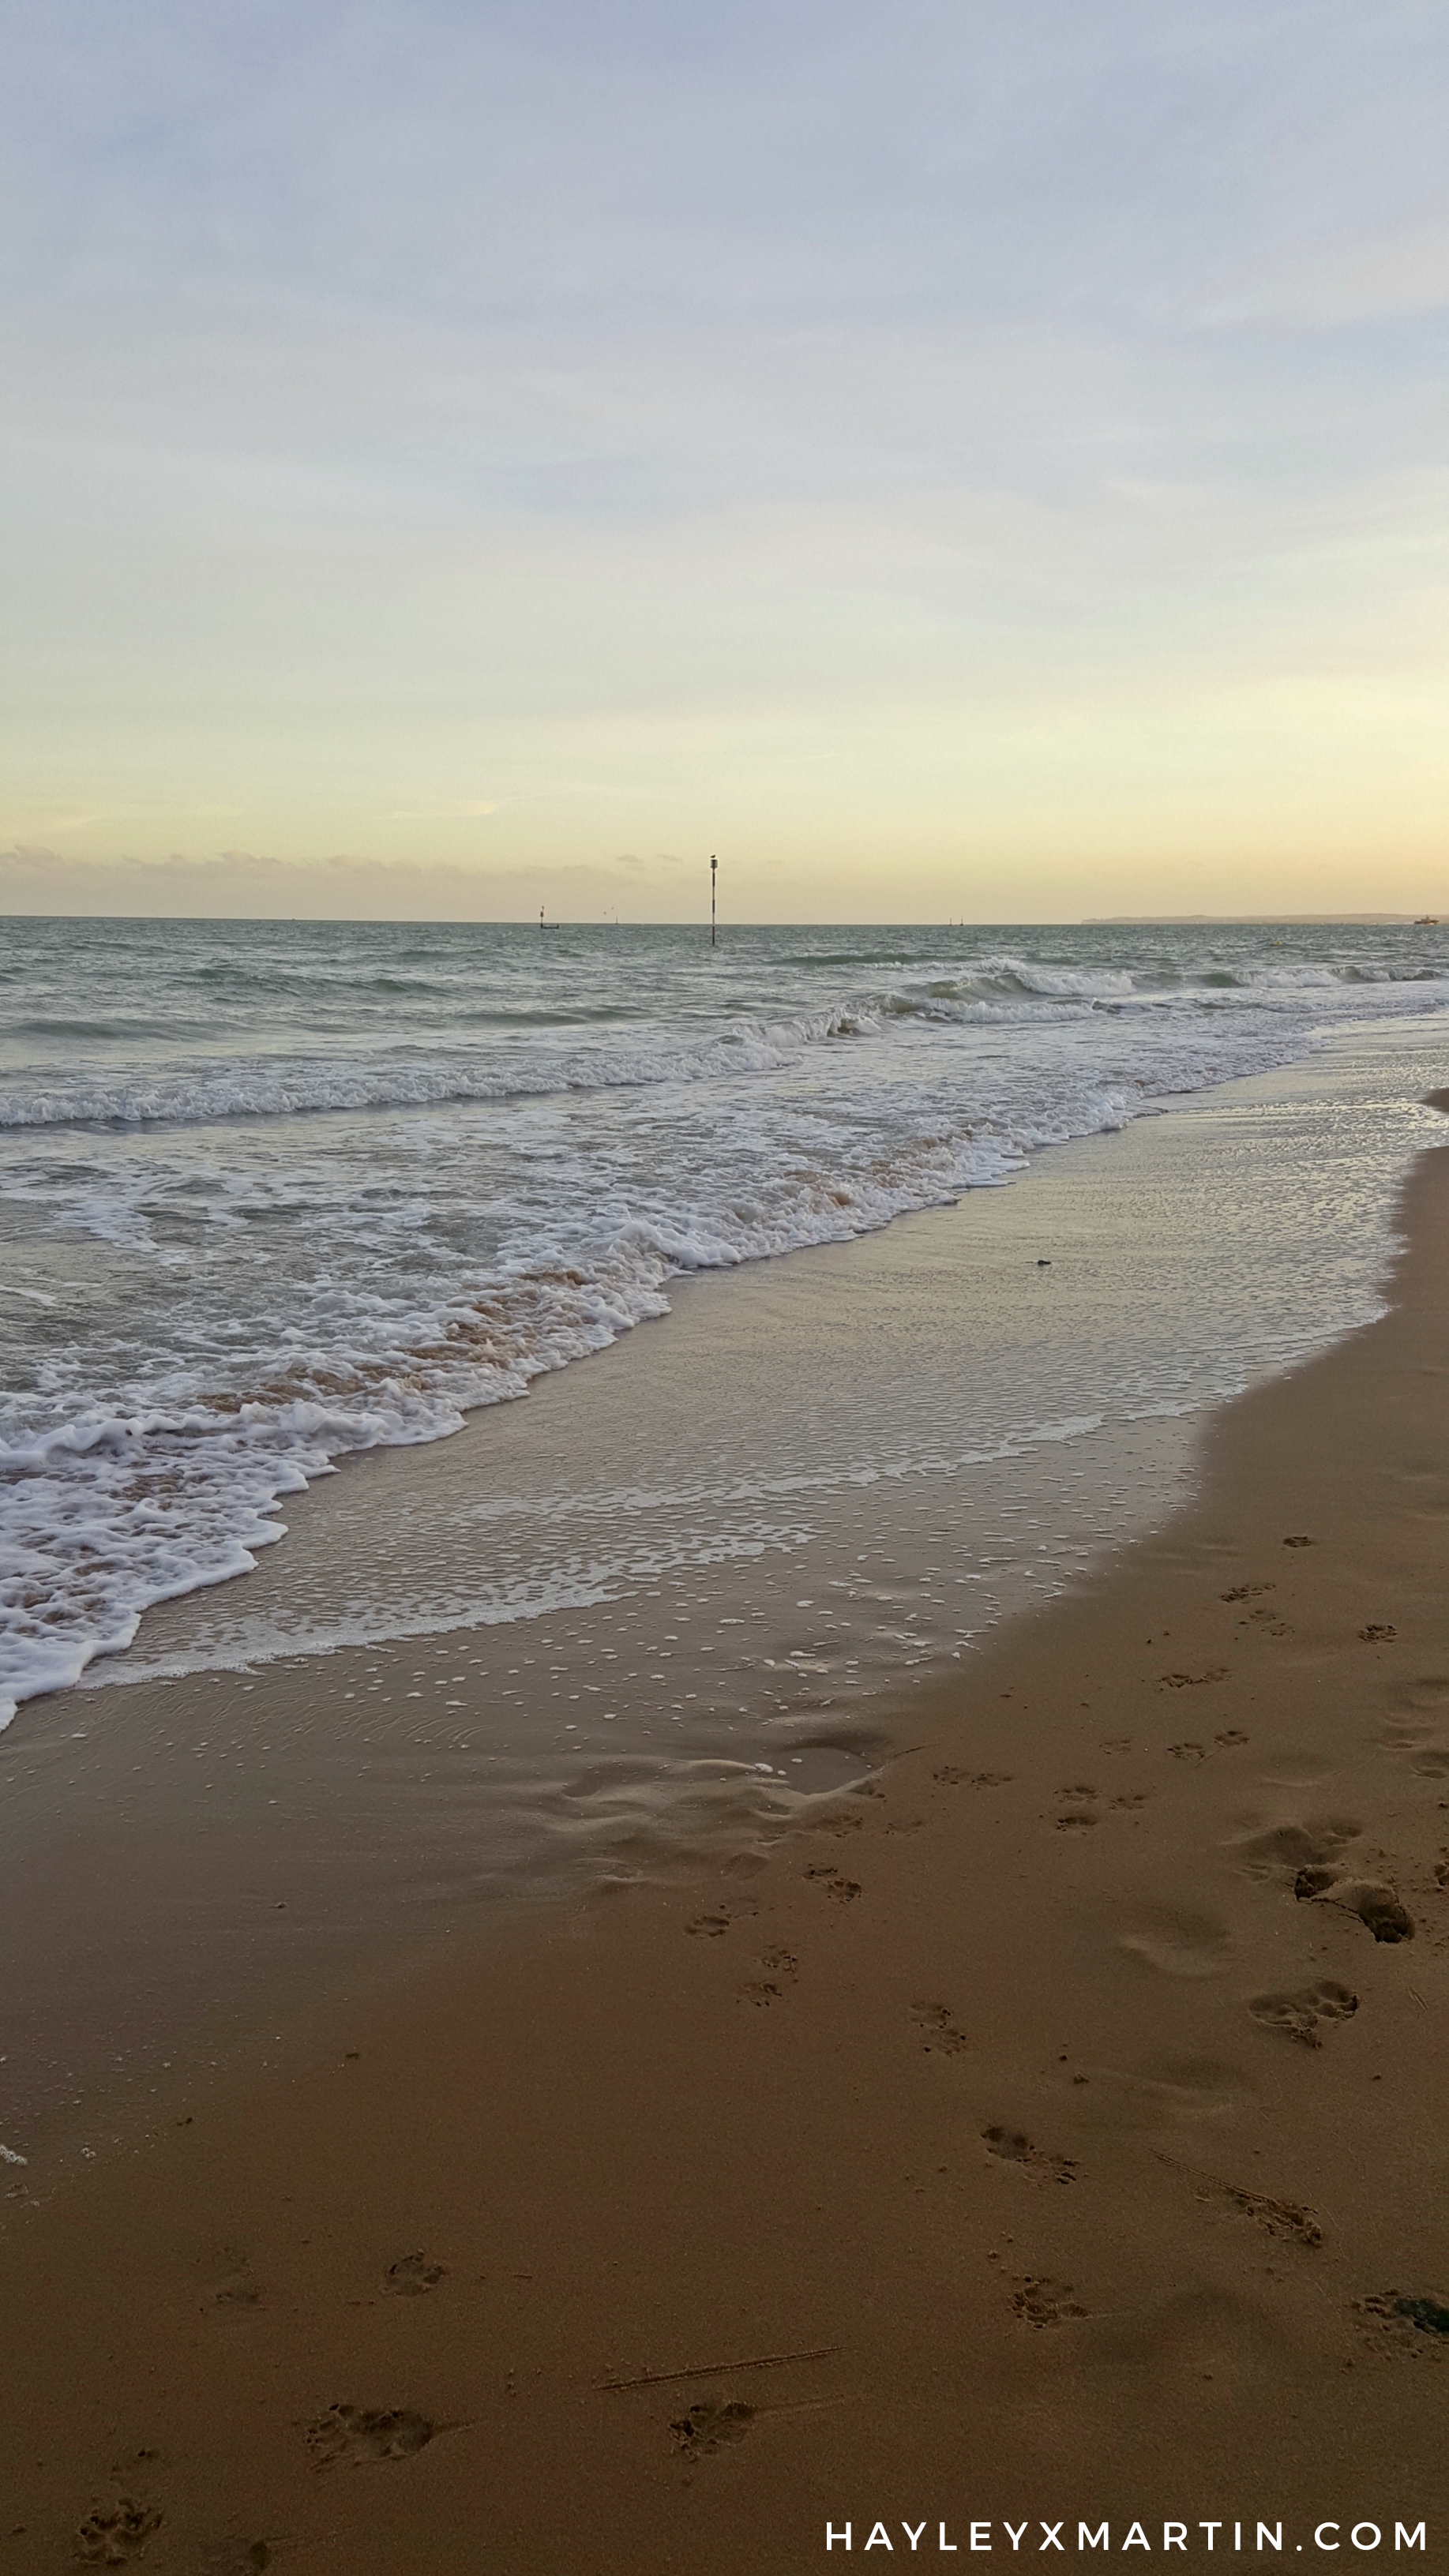 Blogtober Day 12 | Let's Talk About Happiness + Sunset Beach Walk ...